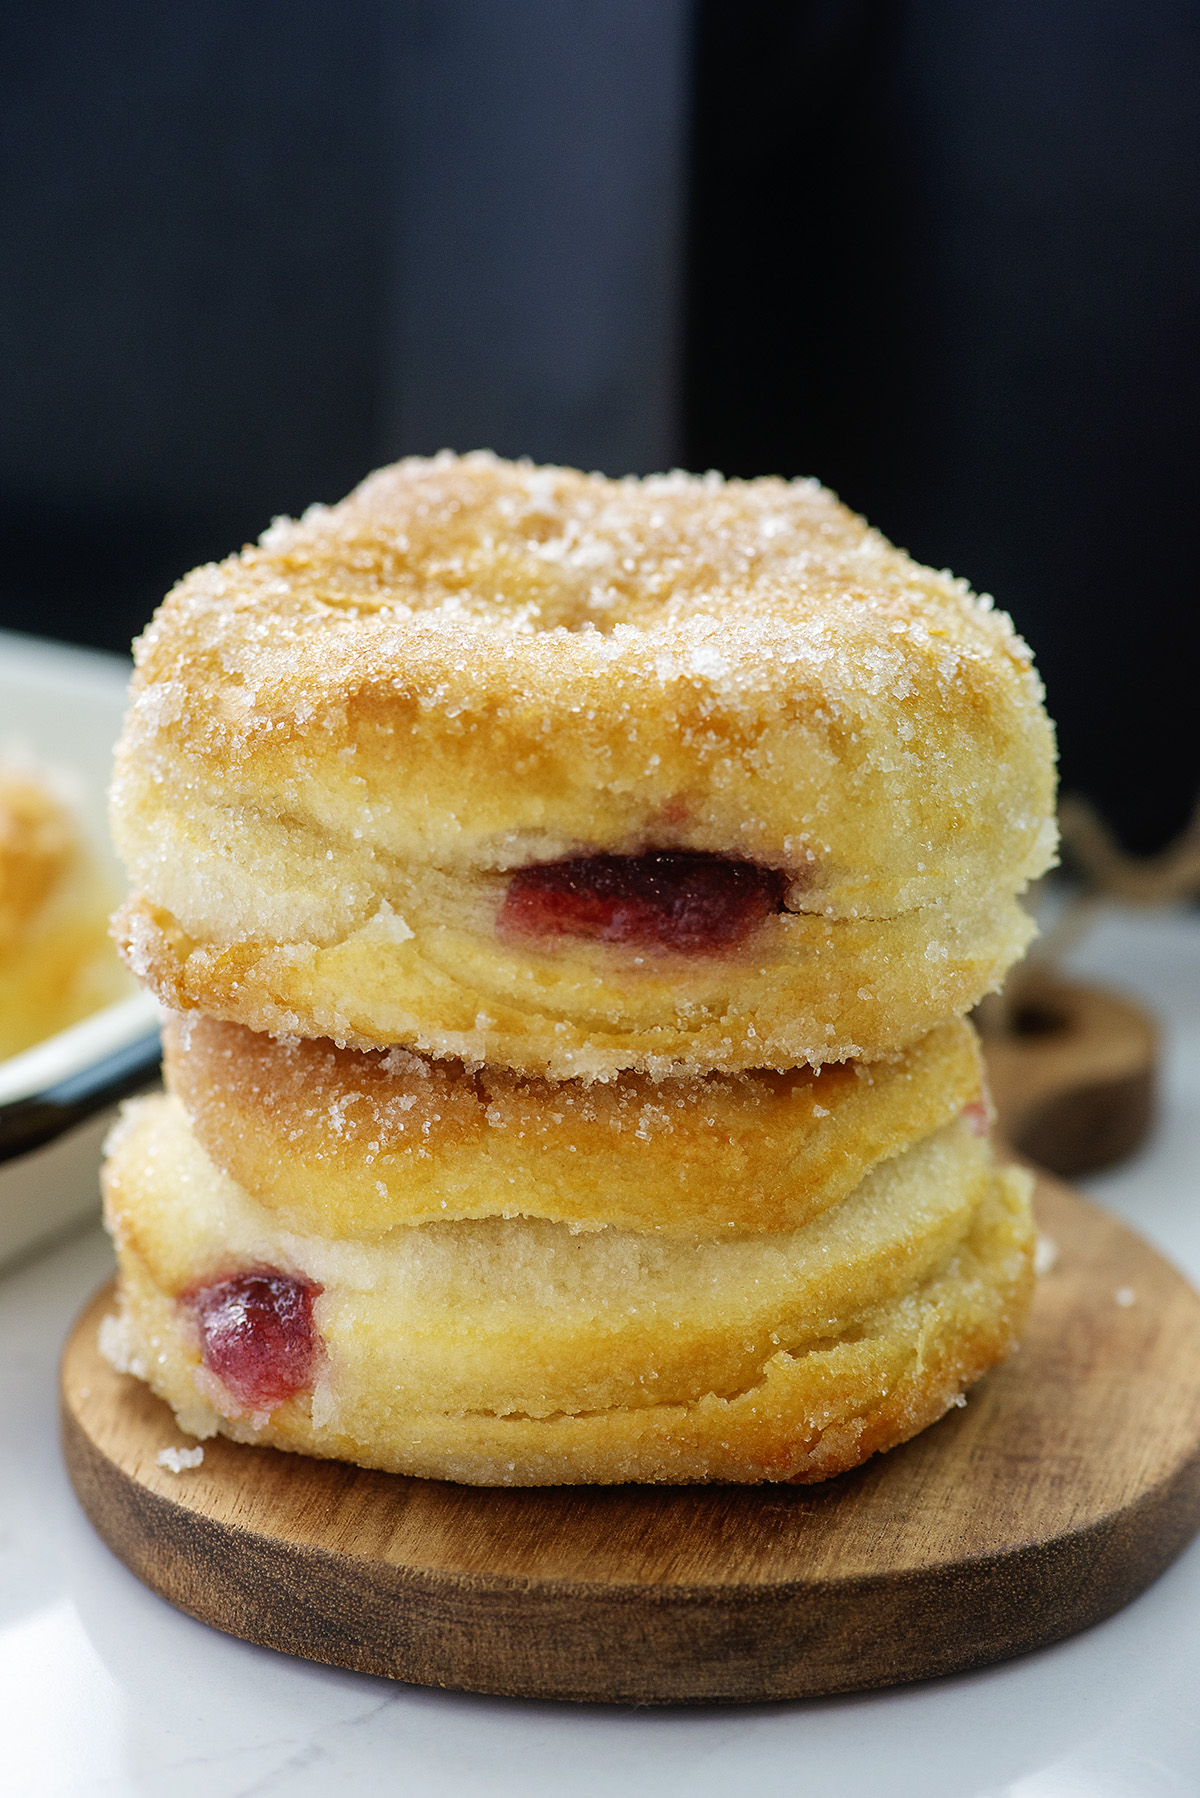 Two sugar coated jelly donuts stacked up.